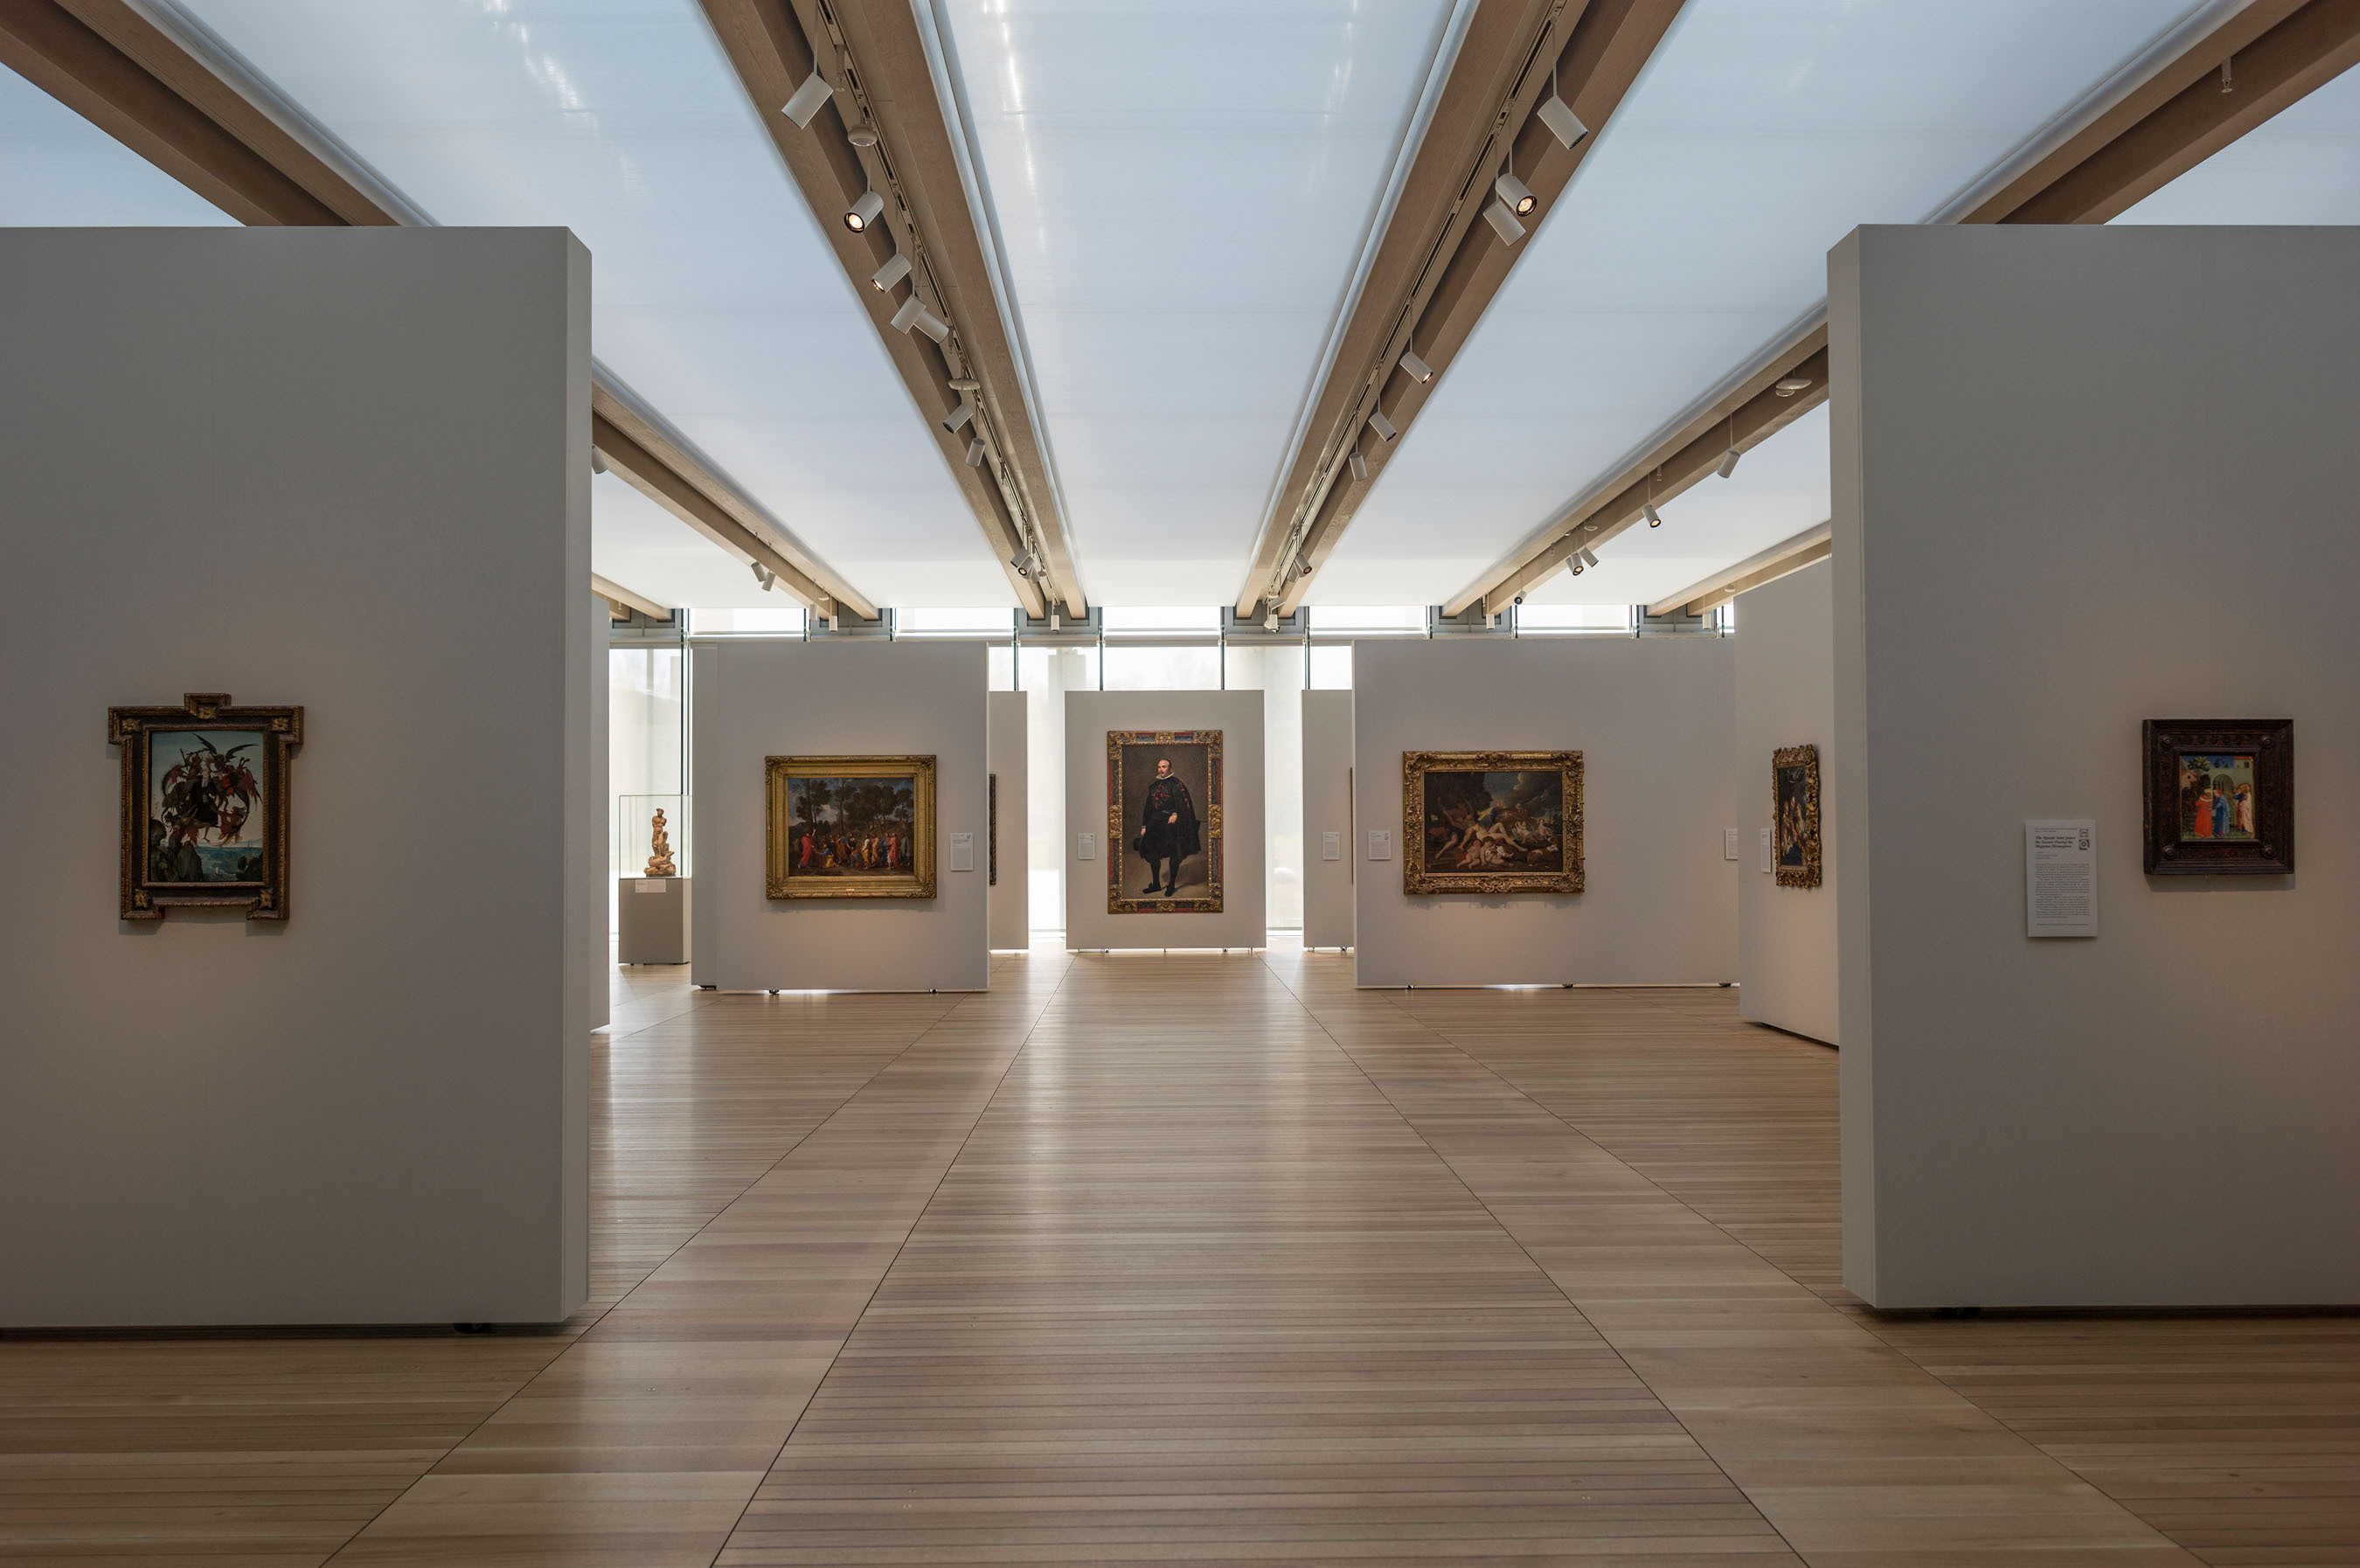 South gallery, featuring works by Michelangelo, Poussin, Velazquez, and Fra Angelico from the Kimbell's collection. Renzo Piano Pavilion, November 2013. Kimbell Art Museum, Fort Worth, Texas. Photo by Robert Polidori. (PRNewsFoto/Kimbell Art Museum) (PRNewsFoto/KIMBELL ART MUSEUM)